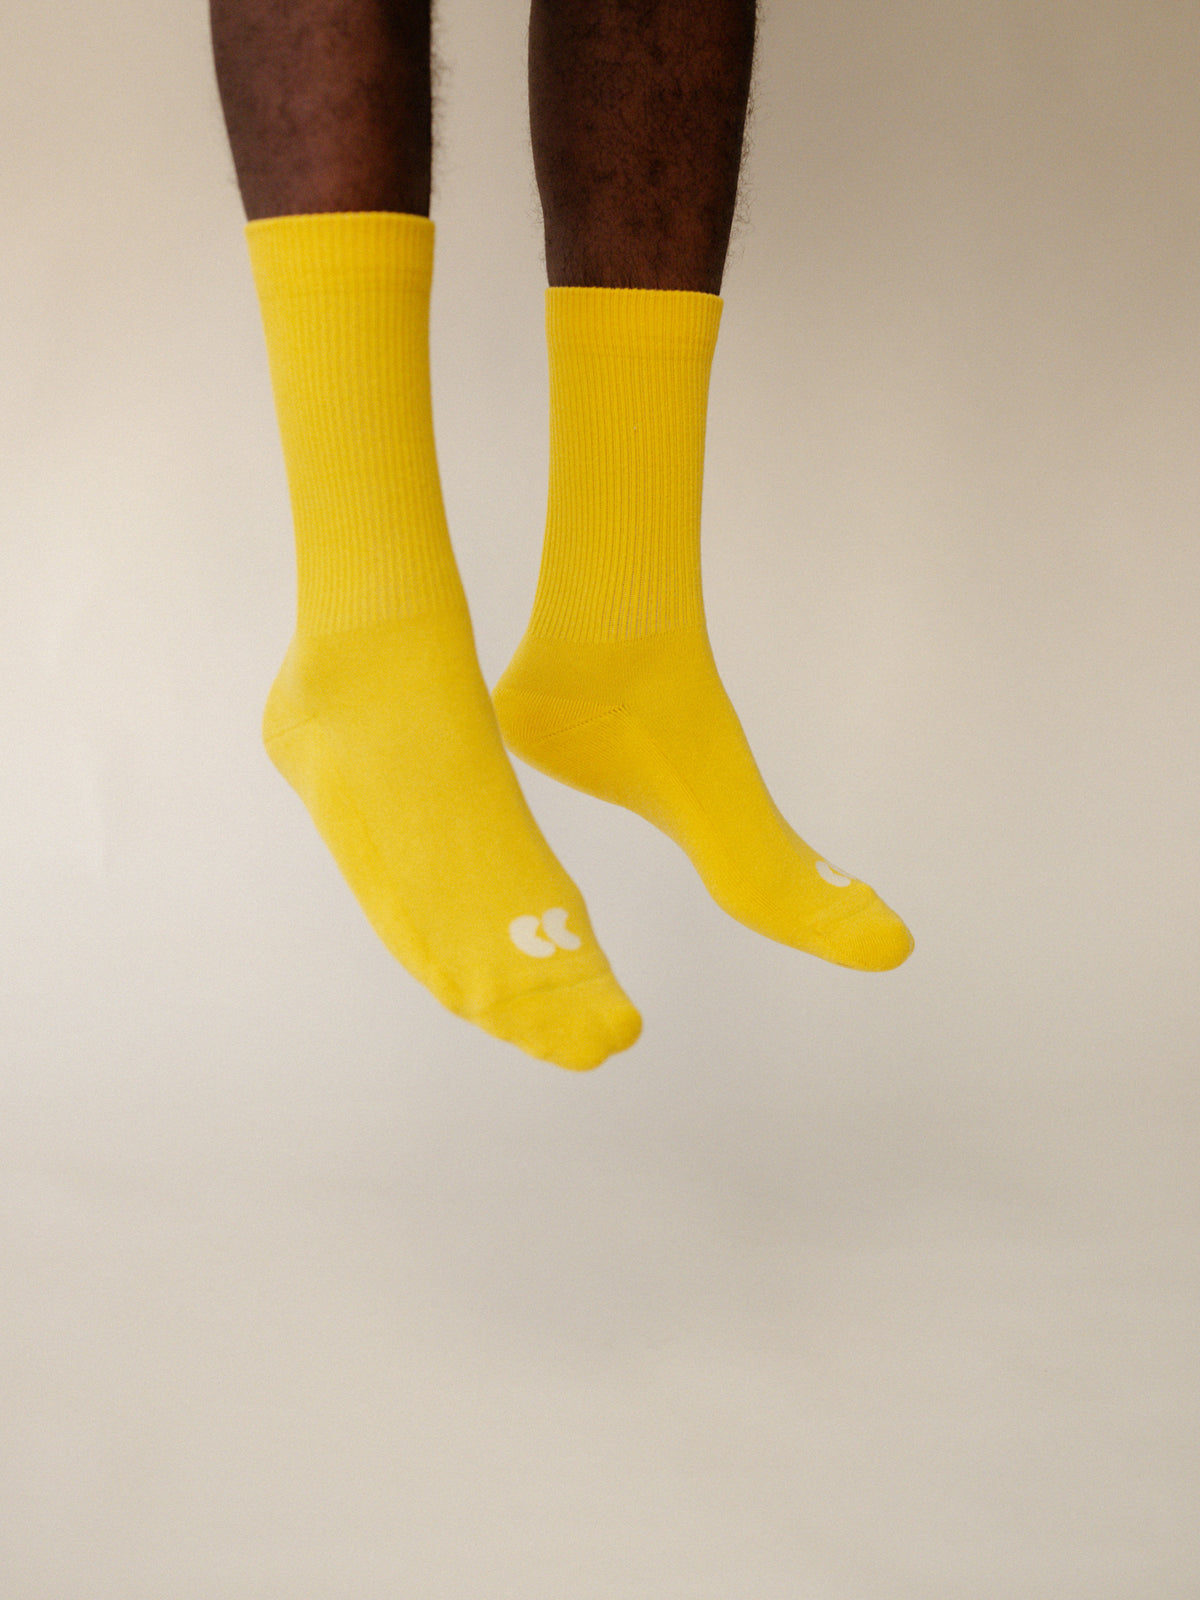 
            image of male legs mid jump  wearing unisex sports calf sock in canary yellow